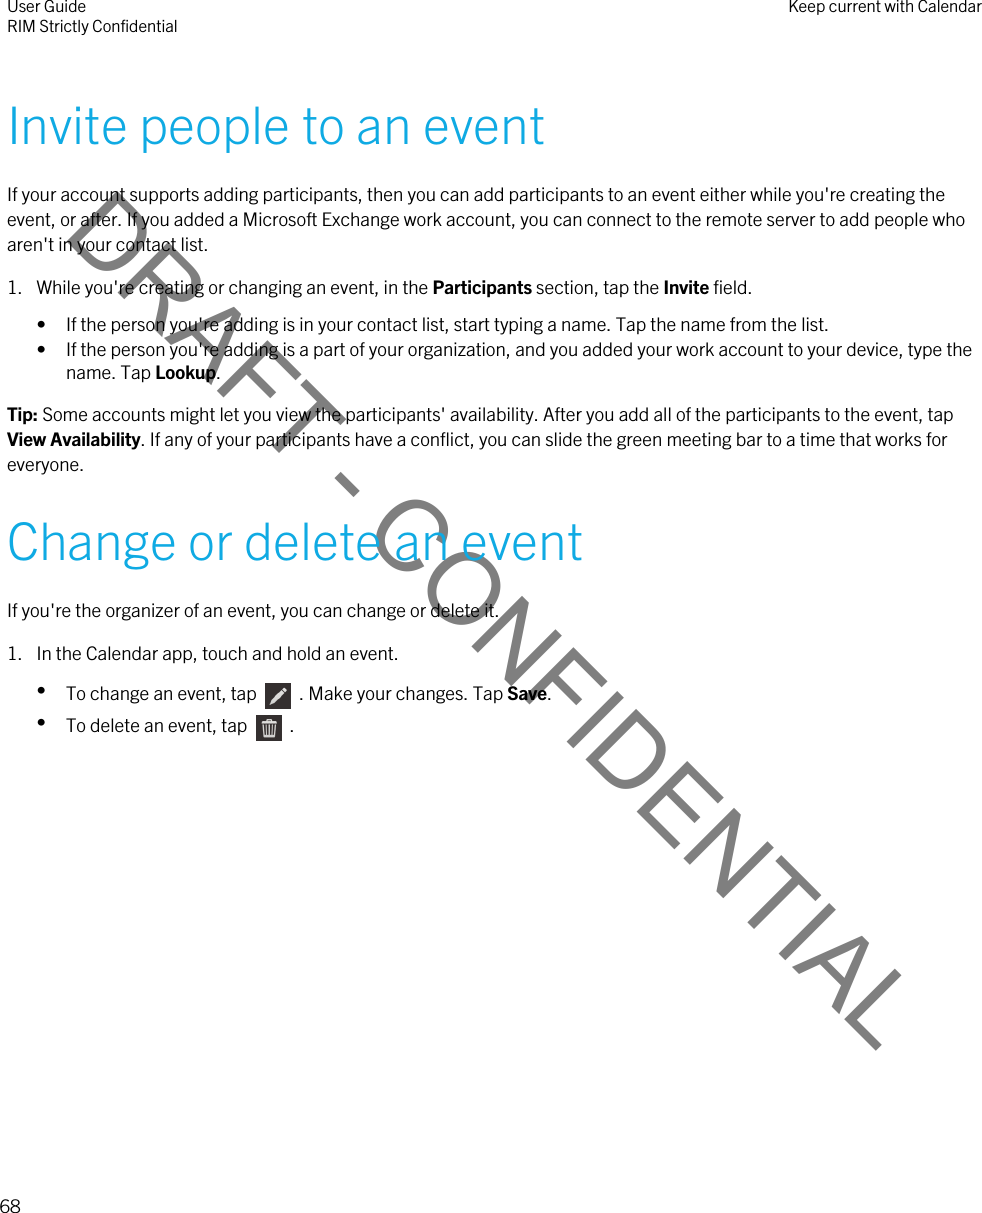 DRAFT - CONFIDENTIALInvite people to an eventIf your account supports adding participants, then you can add participants to an event either while you&apos;re creating the event, or after. If you added a Microsoft Exchange work account, you can connect to the remote server to add people who aren&apos;t in your contact list.1. While you&apos;re creating or changing an event, in the Participants section, tap the Invite field.• If the person you&apos;re adding is in your contact list, start typing a name. Tap the name from the list.• If the person you&apos;re adding is a part of your organization, and you added your work account to your device, type the name. Tap Lookup.Tip: Some accounts might let you view the participants&apos; availability. After you add all of the participants to the event, tap View Availability. If any of your participants have a conflict, you can slide the green meeting bar to a time that works for everyone.Change or delete an eventIf you&apos;re the organizer of an event, you can change or delete it.1. In the Calendar app, touch and hold an event.•To change an event, tap    . Make your changes. Tap Save.•To delete an event, tap    .User GuideRIM Strictly Confidential Keep current with Calendar68 